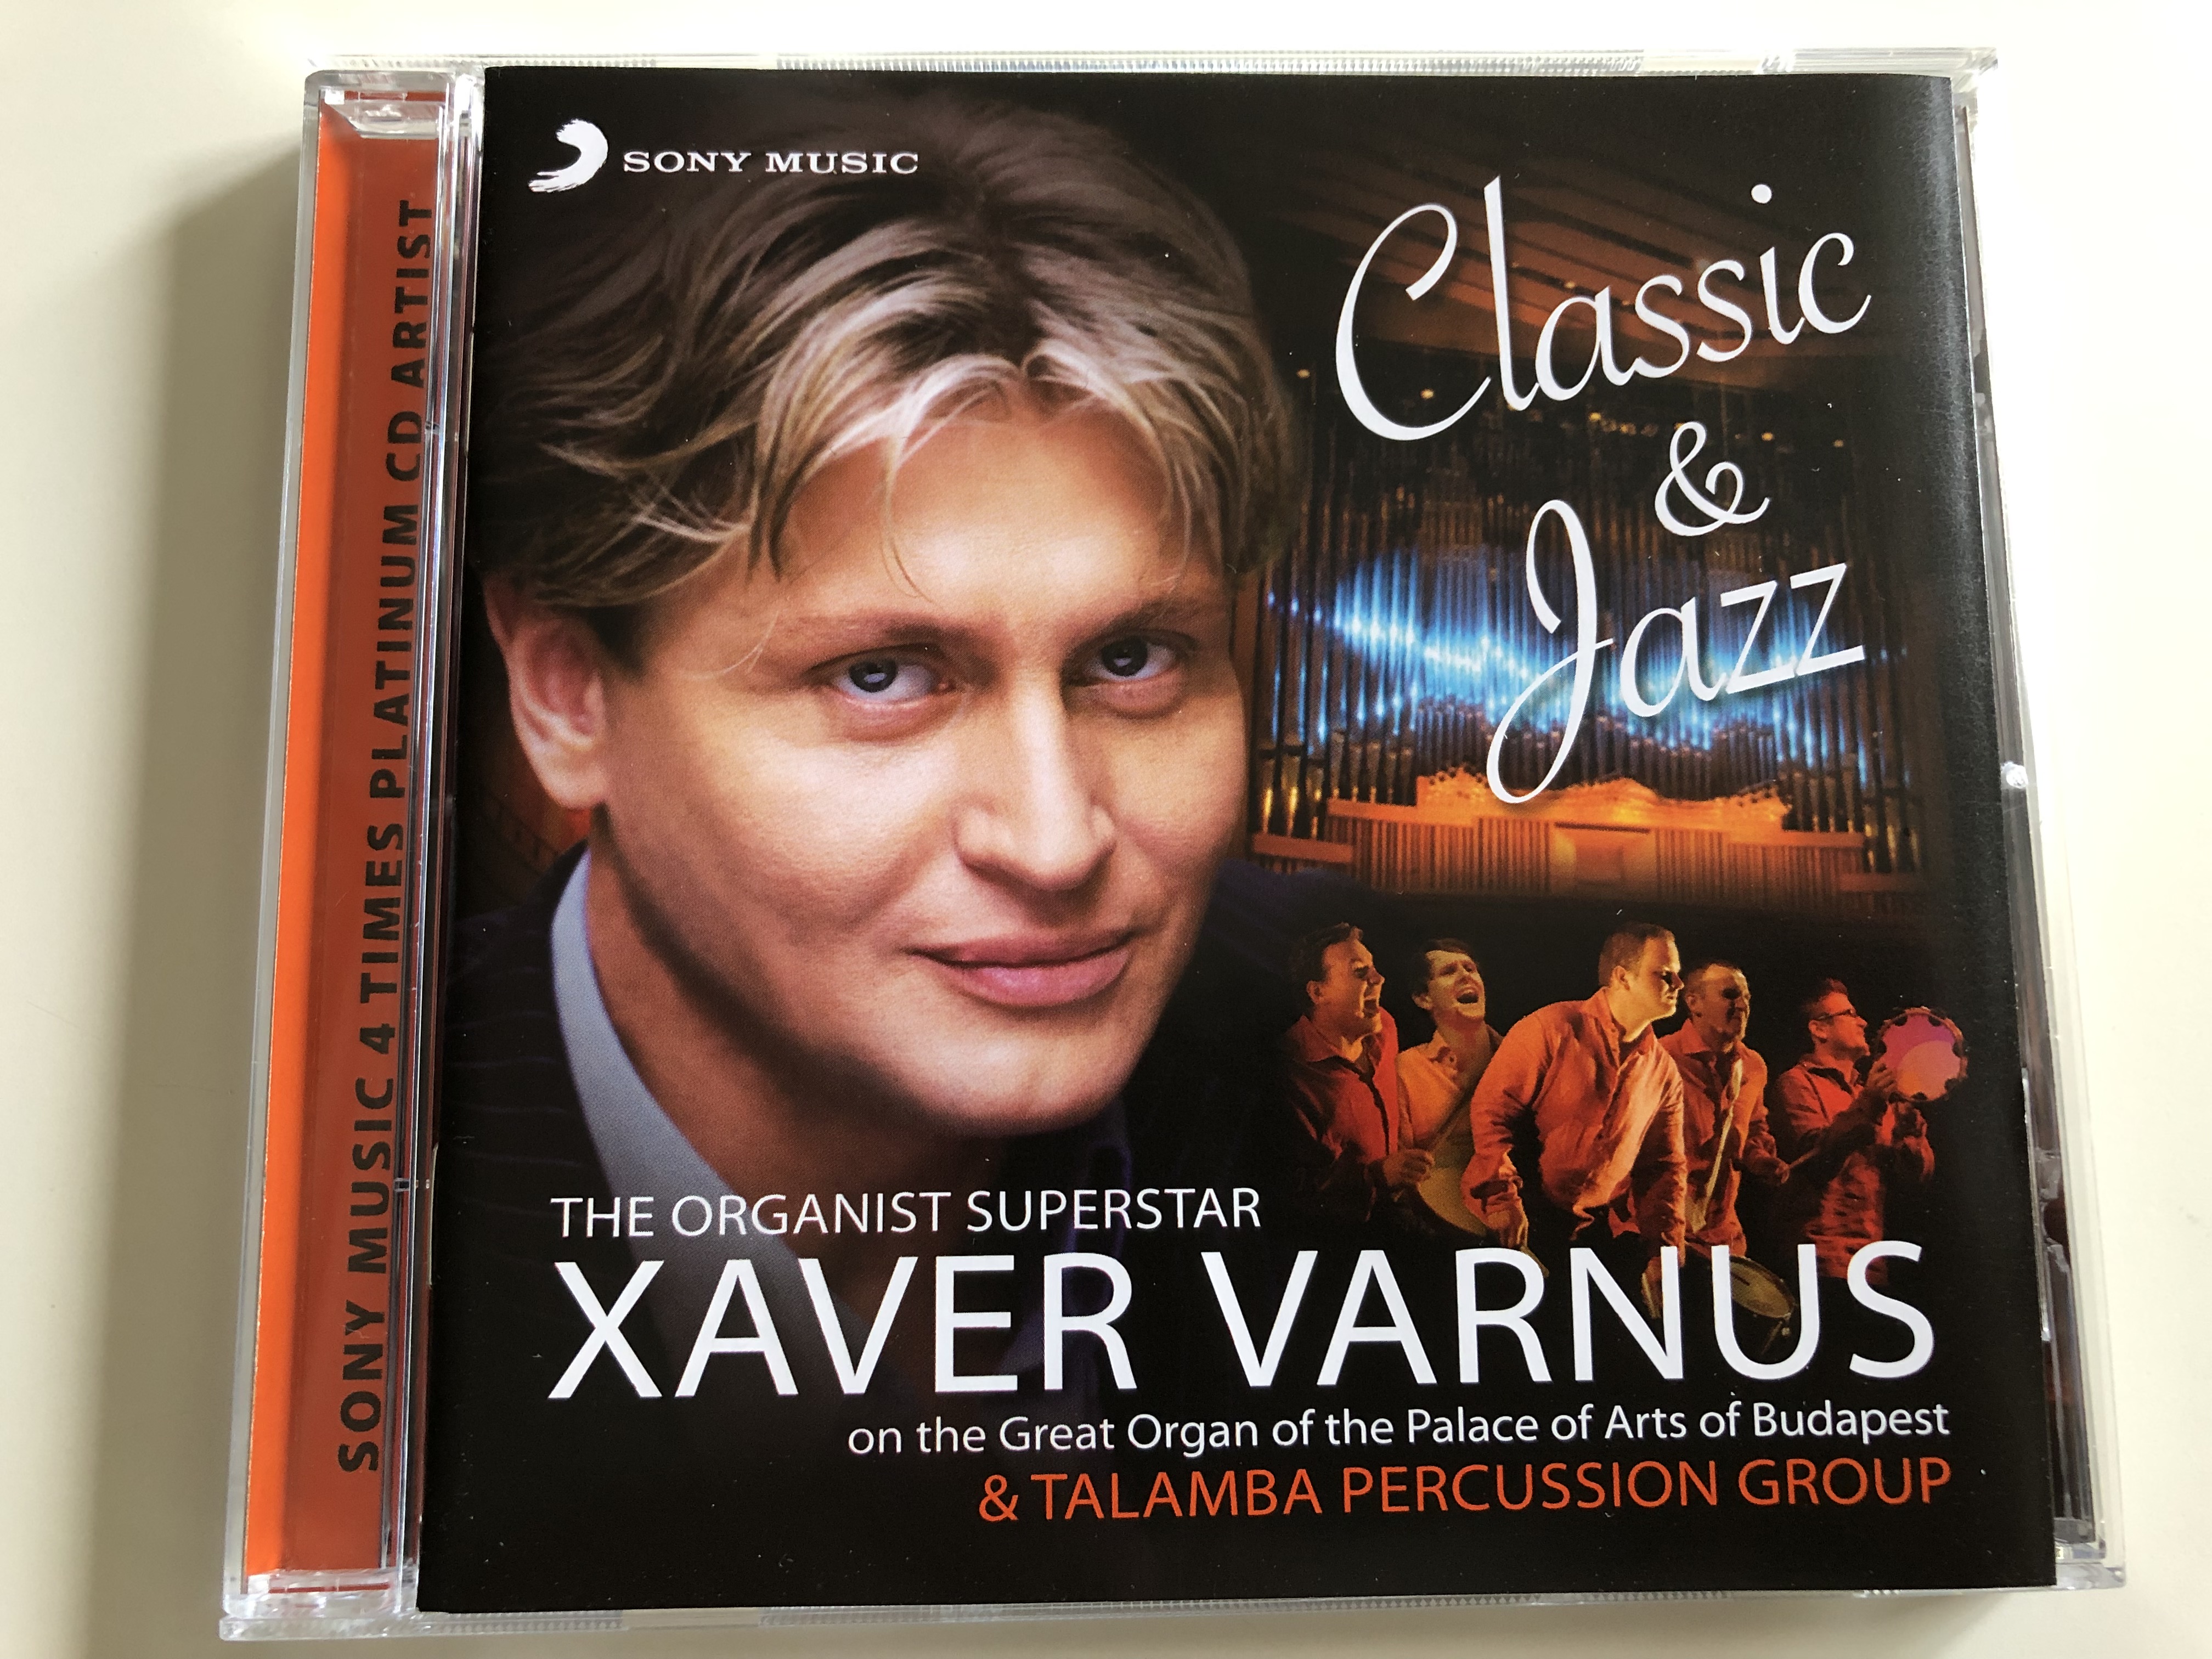 xaver-varnus-classic-jazz-the-organist-superstar-on-the-great-organ-of-the-palace-of-arts-of-budapest-talamba-percussion-group-sony-music-audio-cd-2009-1-.jpg